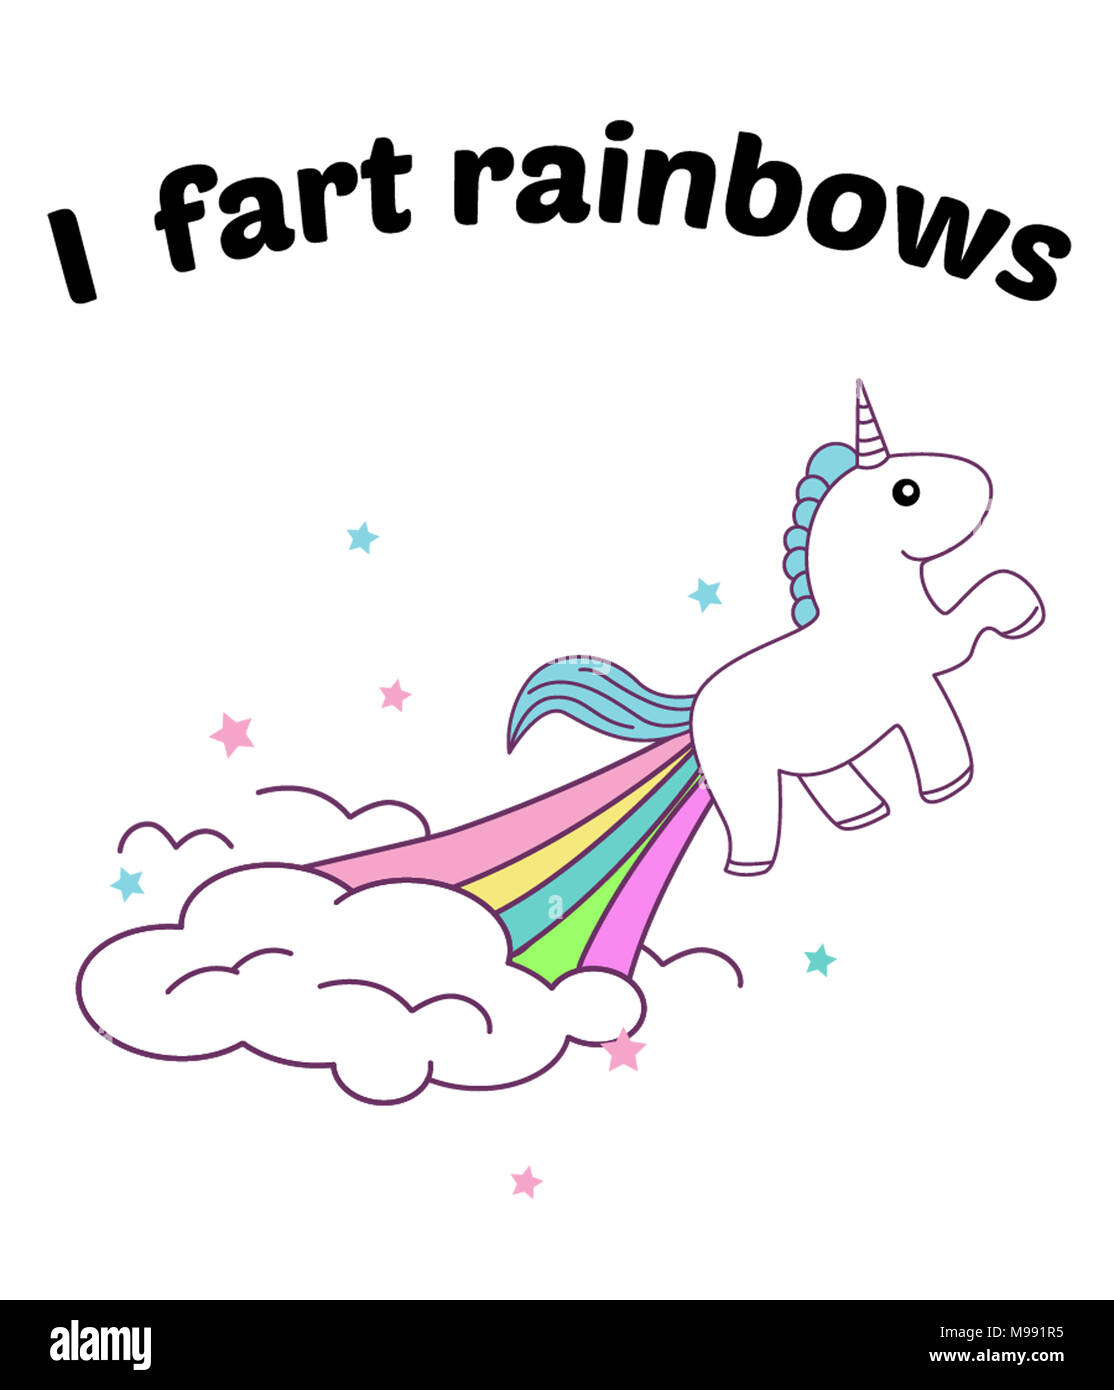 Image result for unicorn farting rainbows